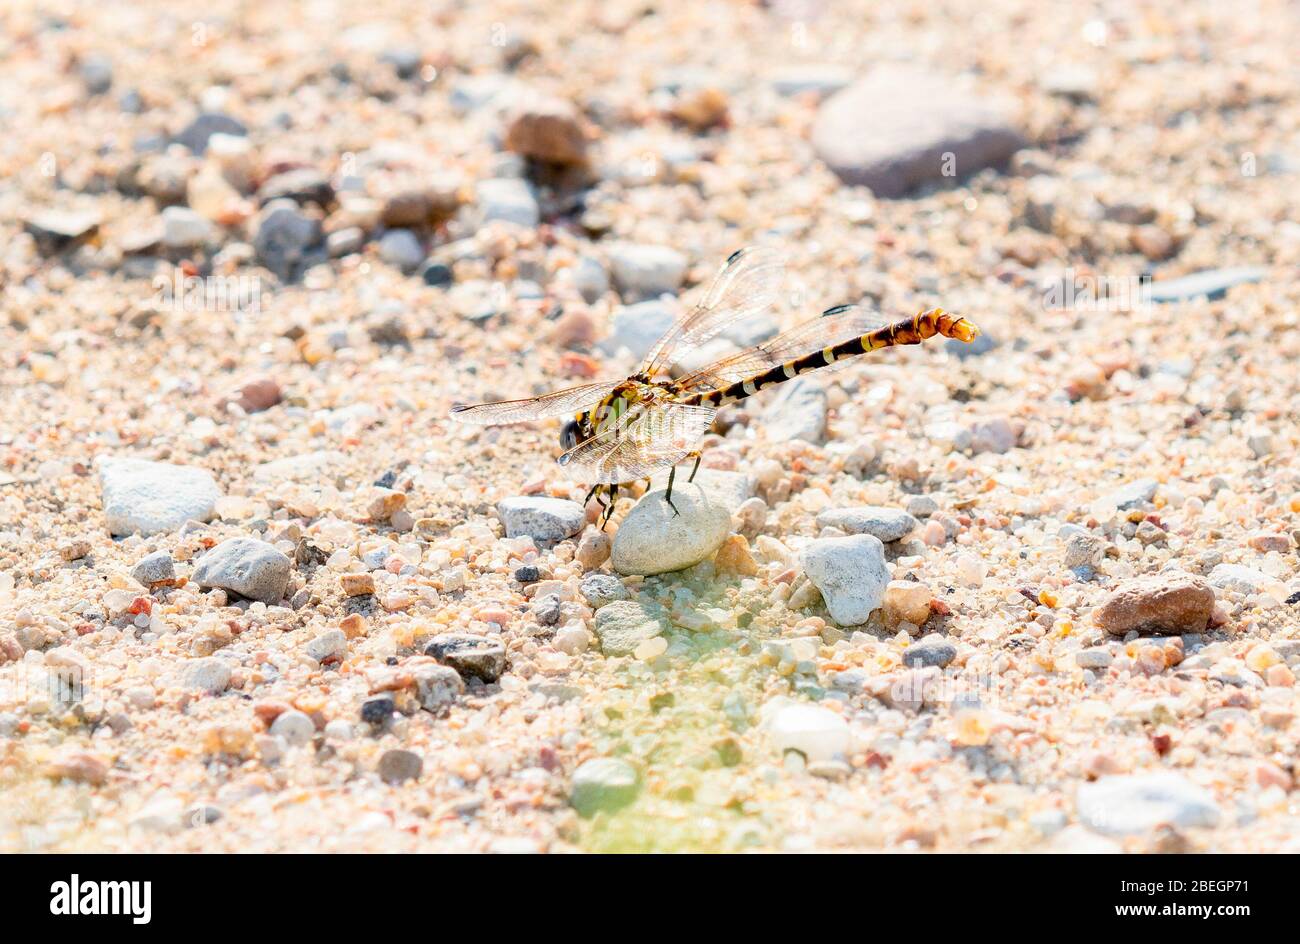 Eastern Ringtail Dragonfly (Erpetogomphus designatus) Perched on a Rock on a Gravel Ground Surface in Eastern Colorado Stock Photo